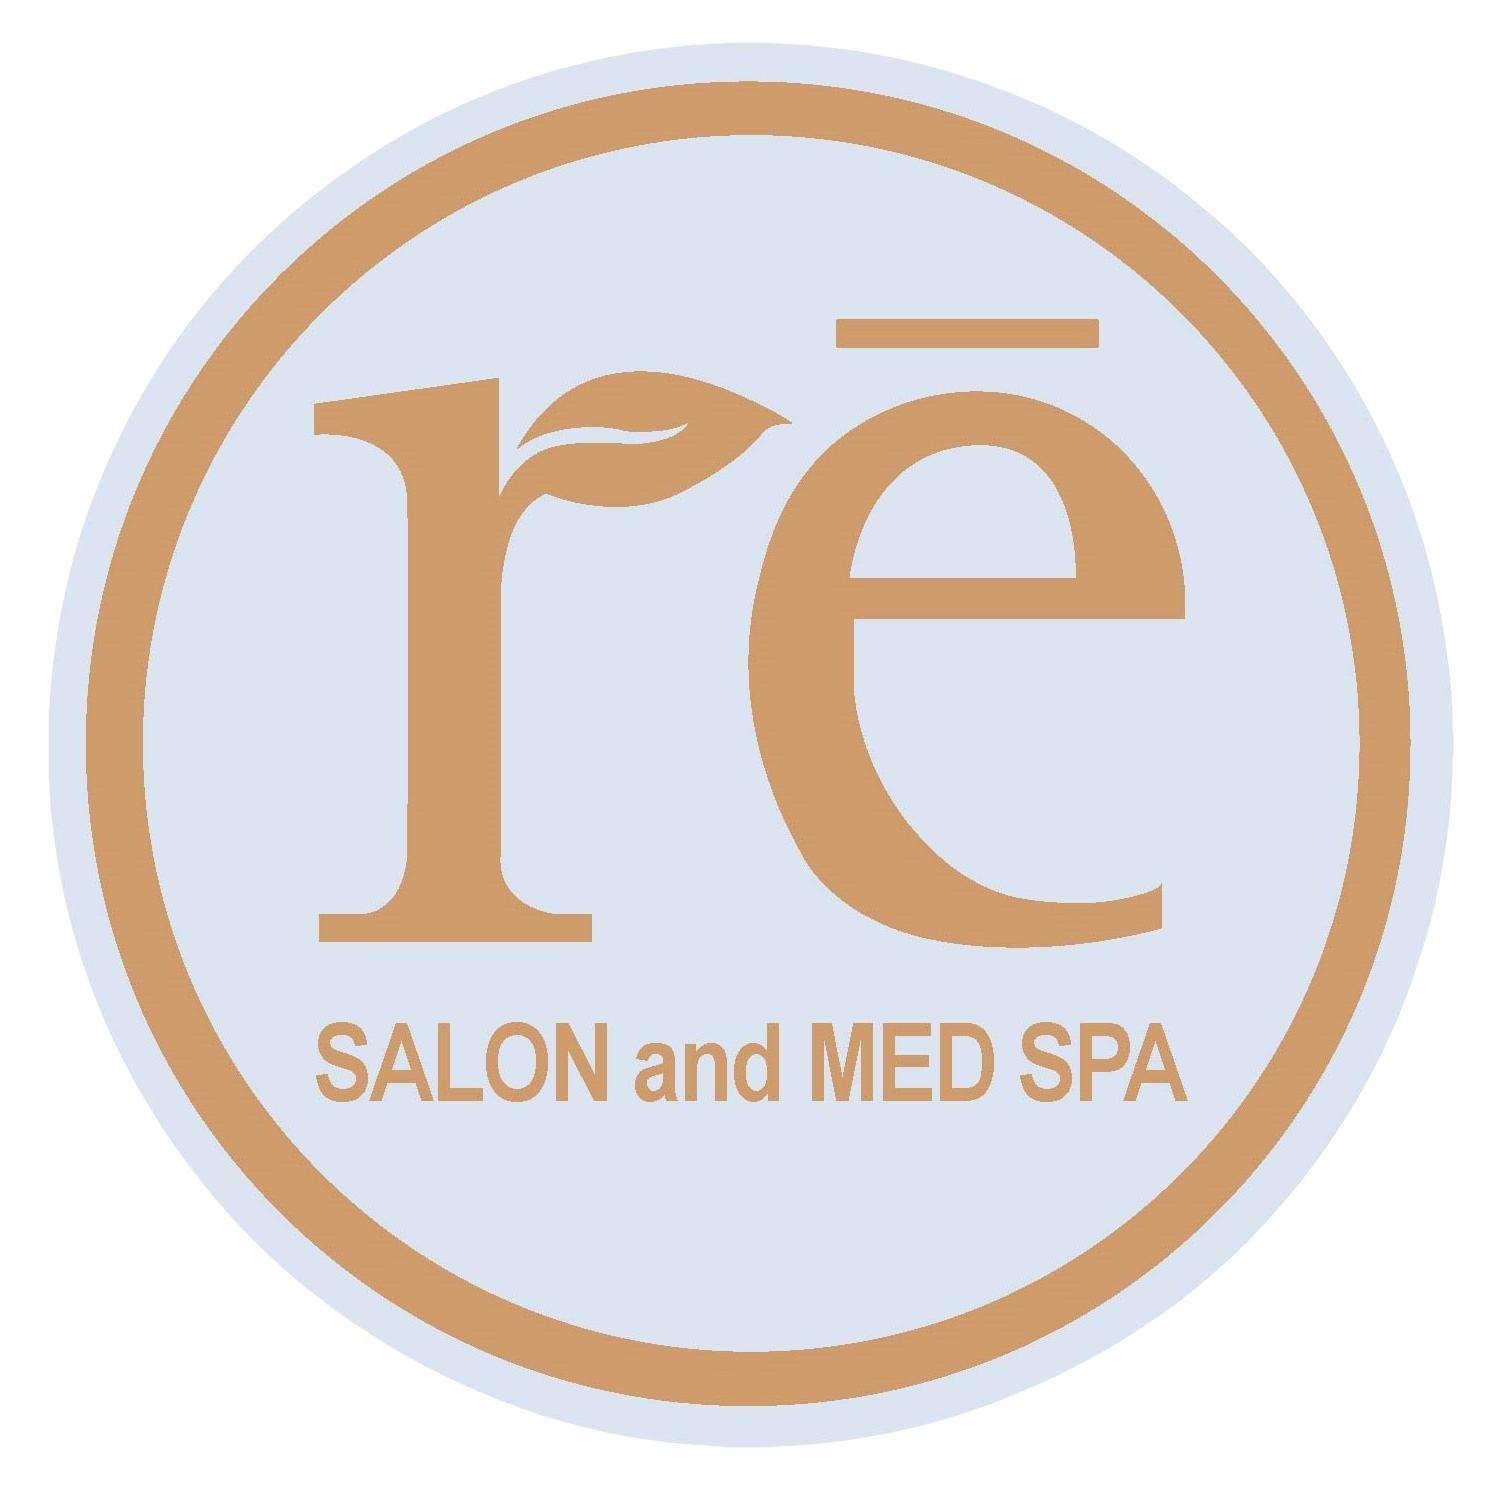 Re Salon and Med Spa - Charlotte, NC 28203 - (704)334-8087 | ShowMeLocal.com